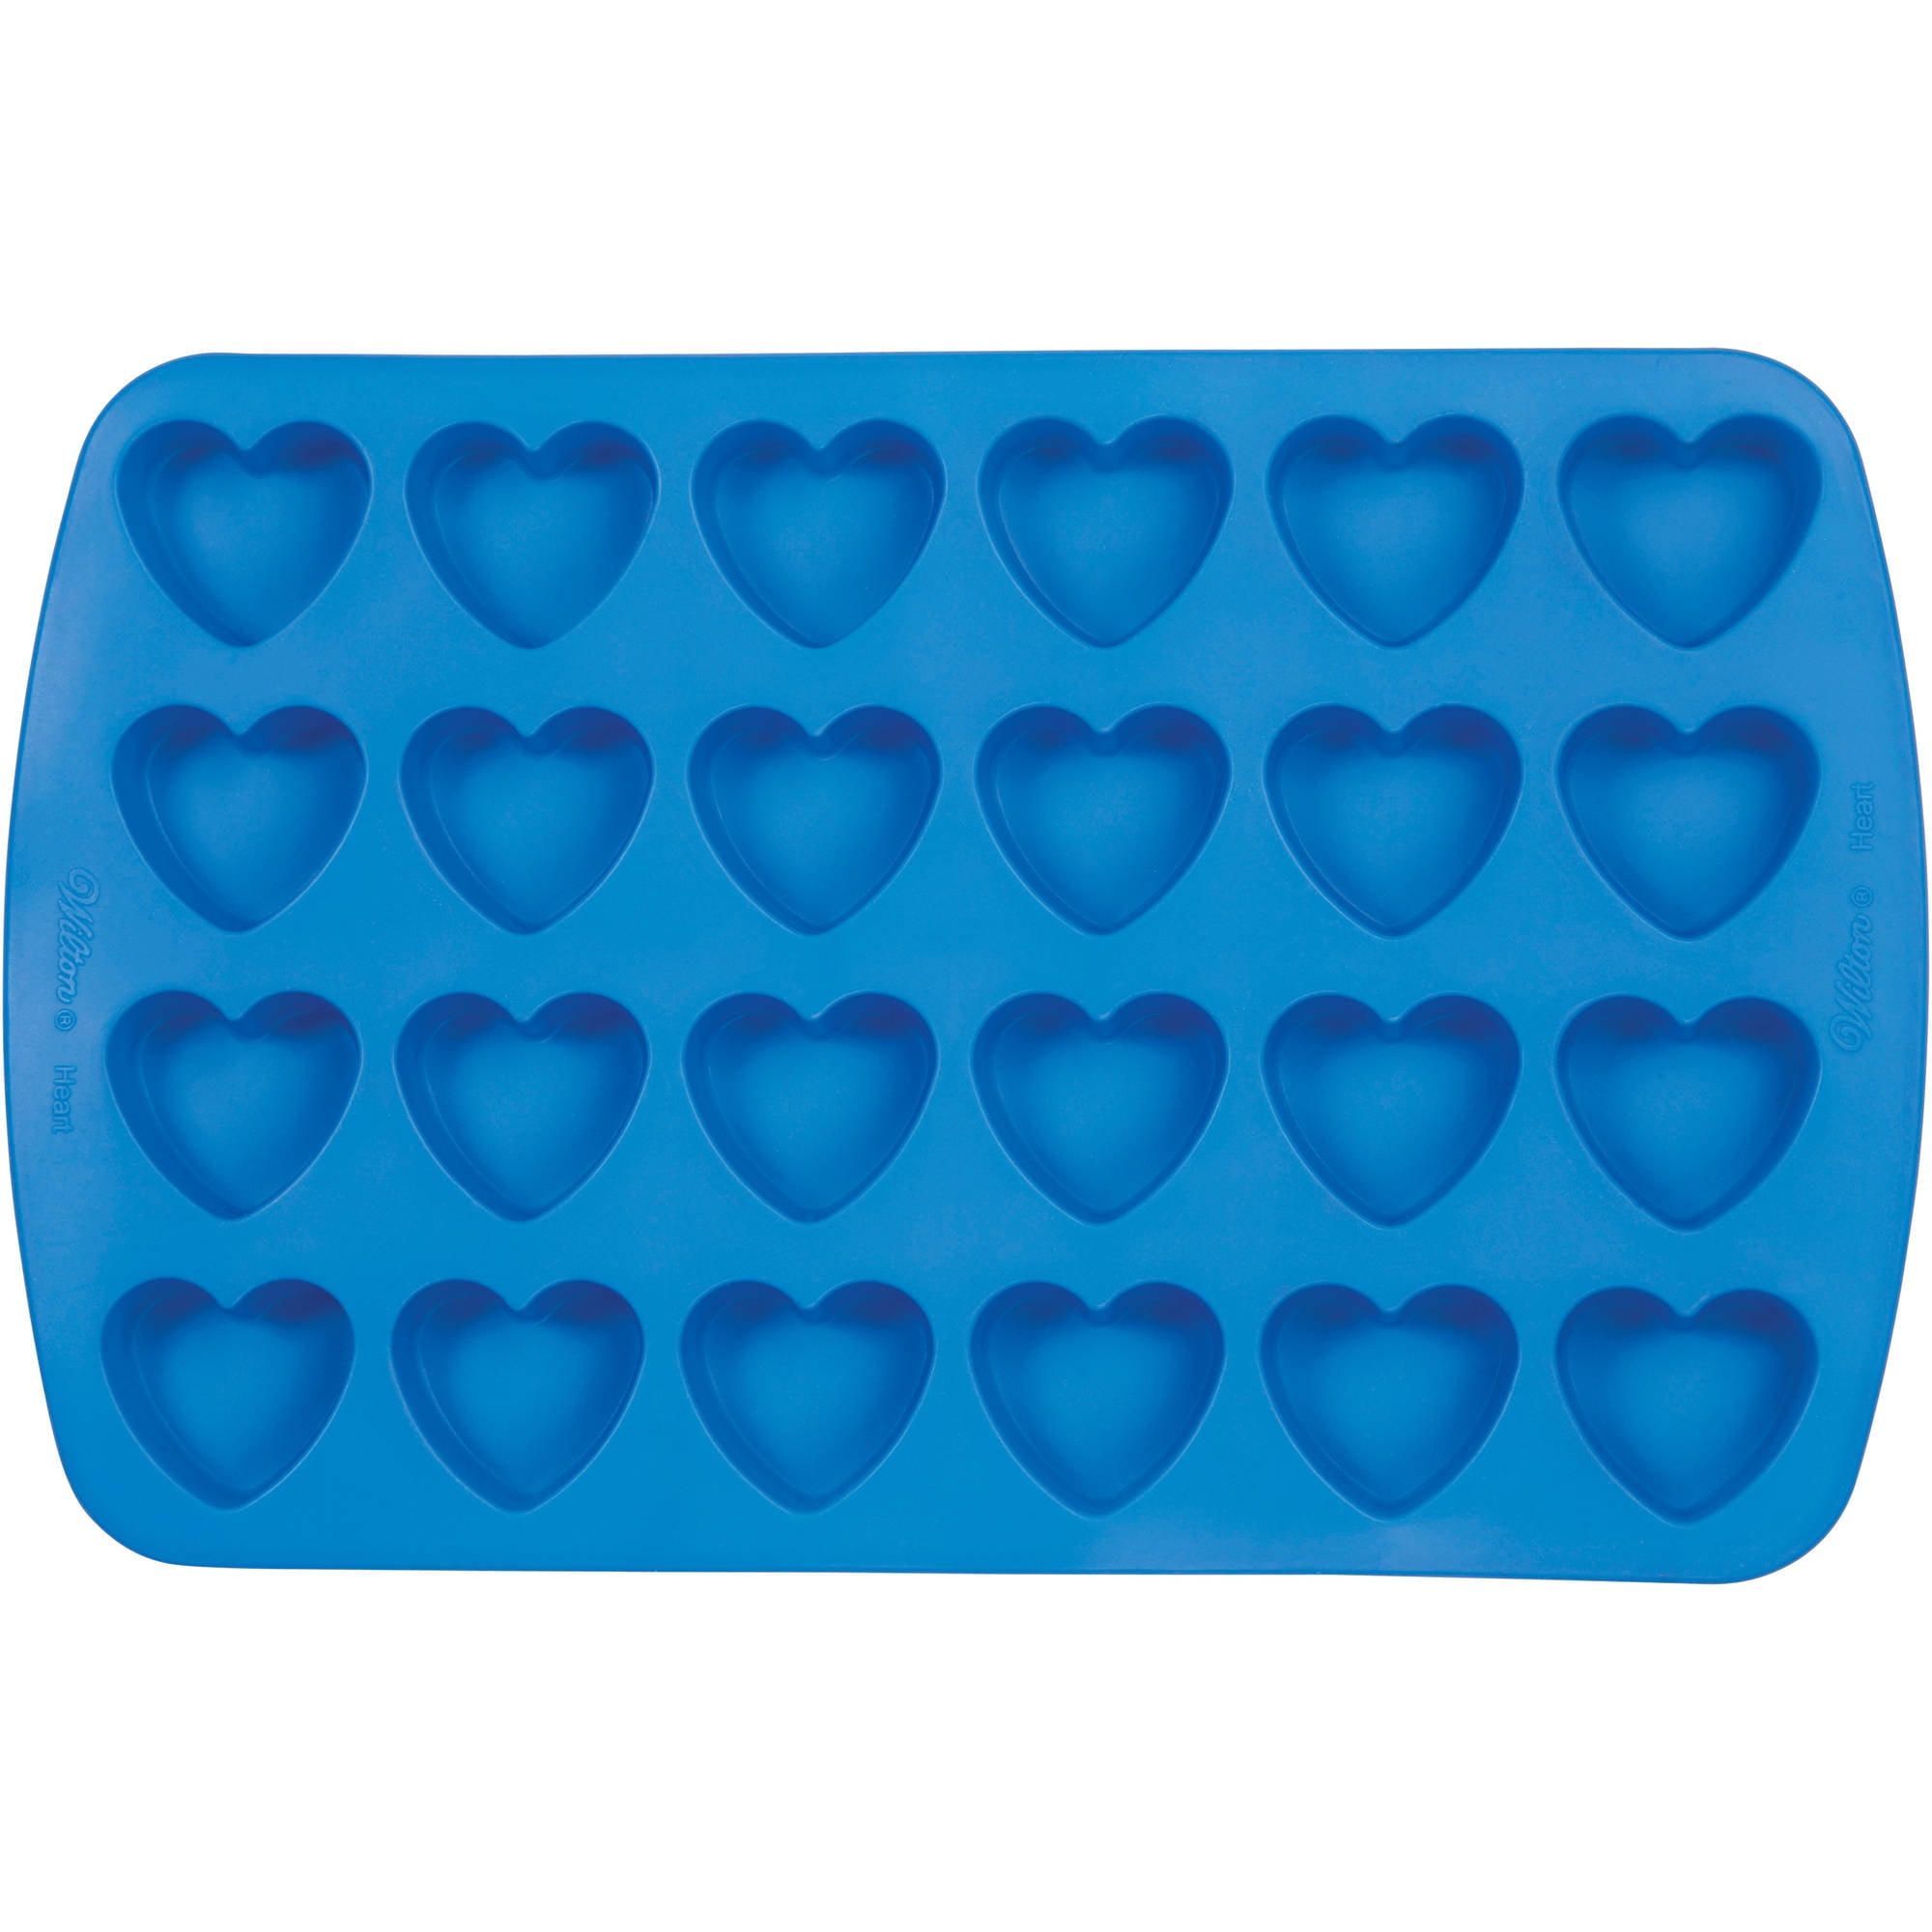 11 Wilton Silicone Soft Flexible HEART Candy Molds ~ Mini Muffin Baking Cups